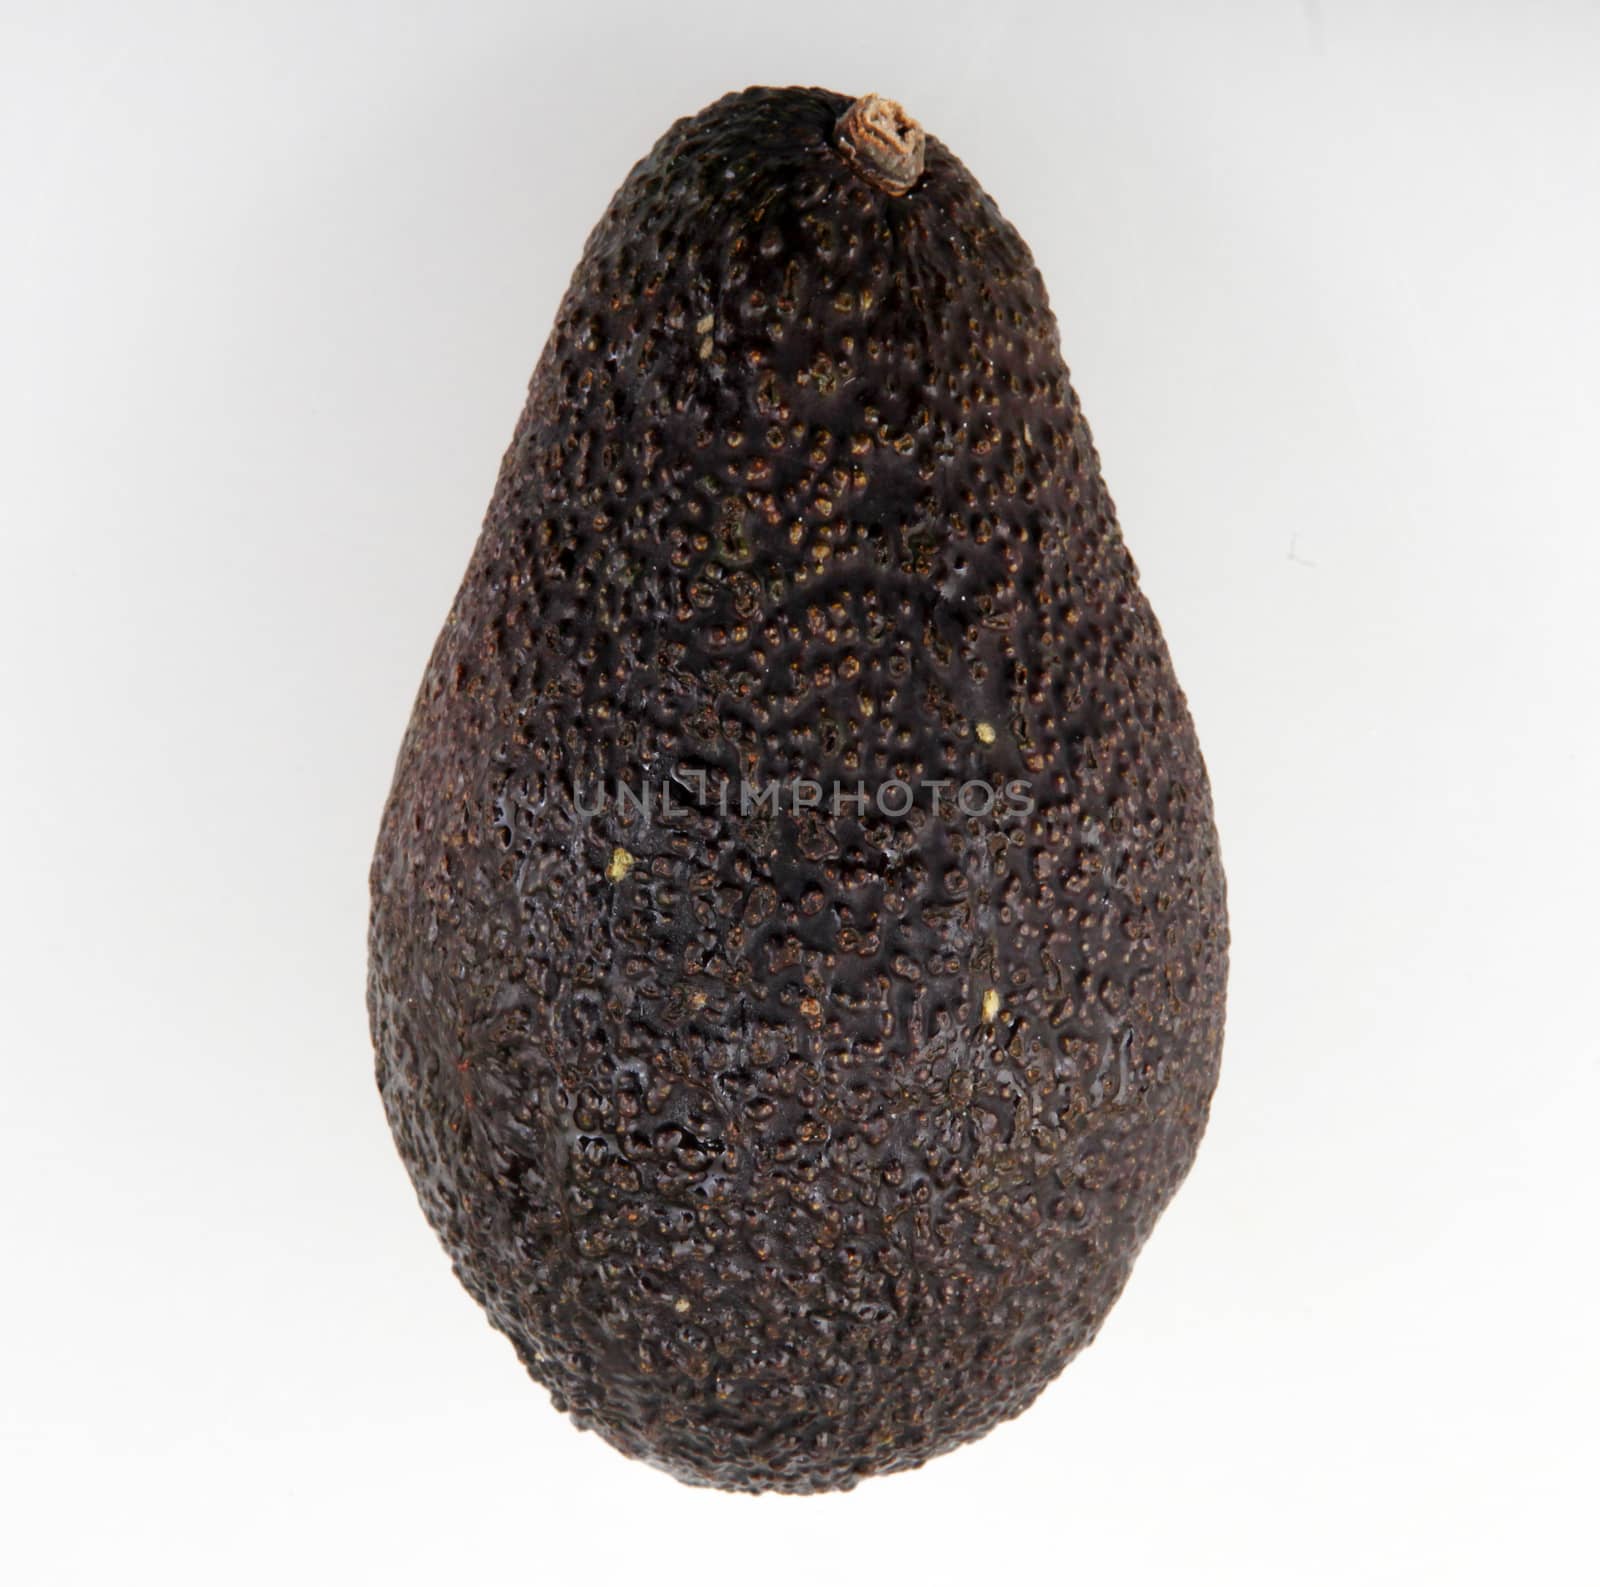 Fresh Hass Avocado Against White Background by nenovbrothers